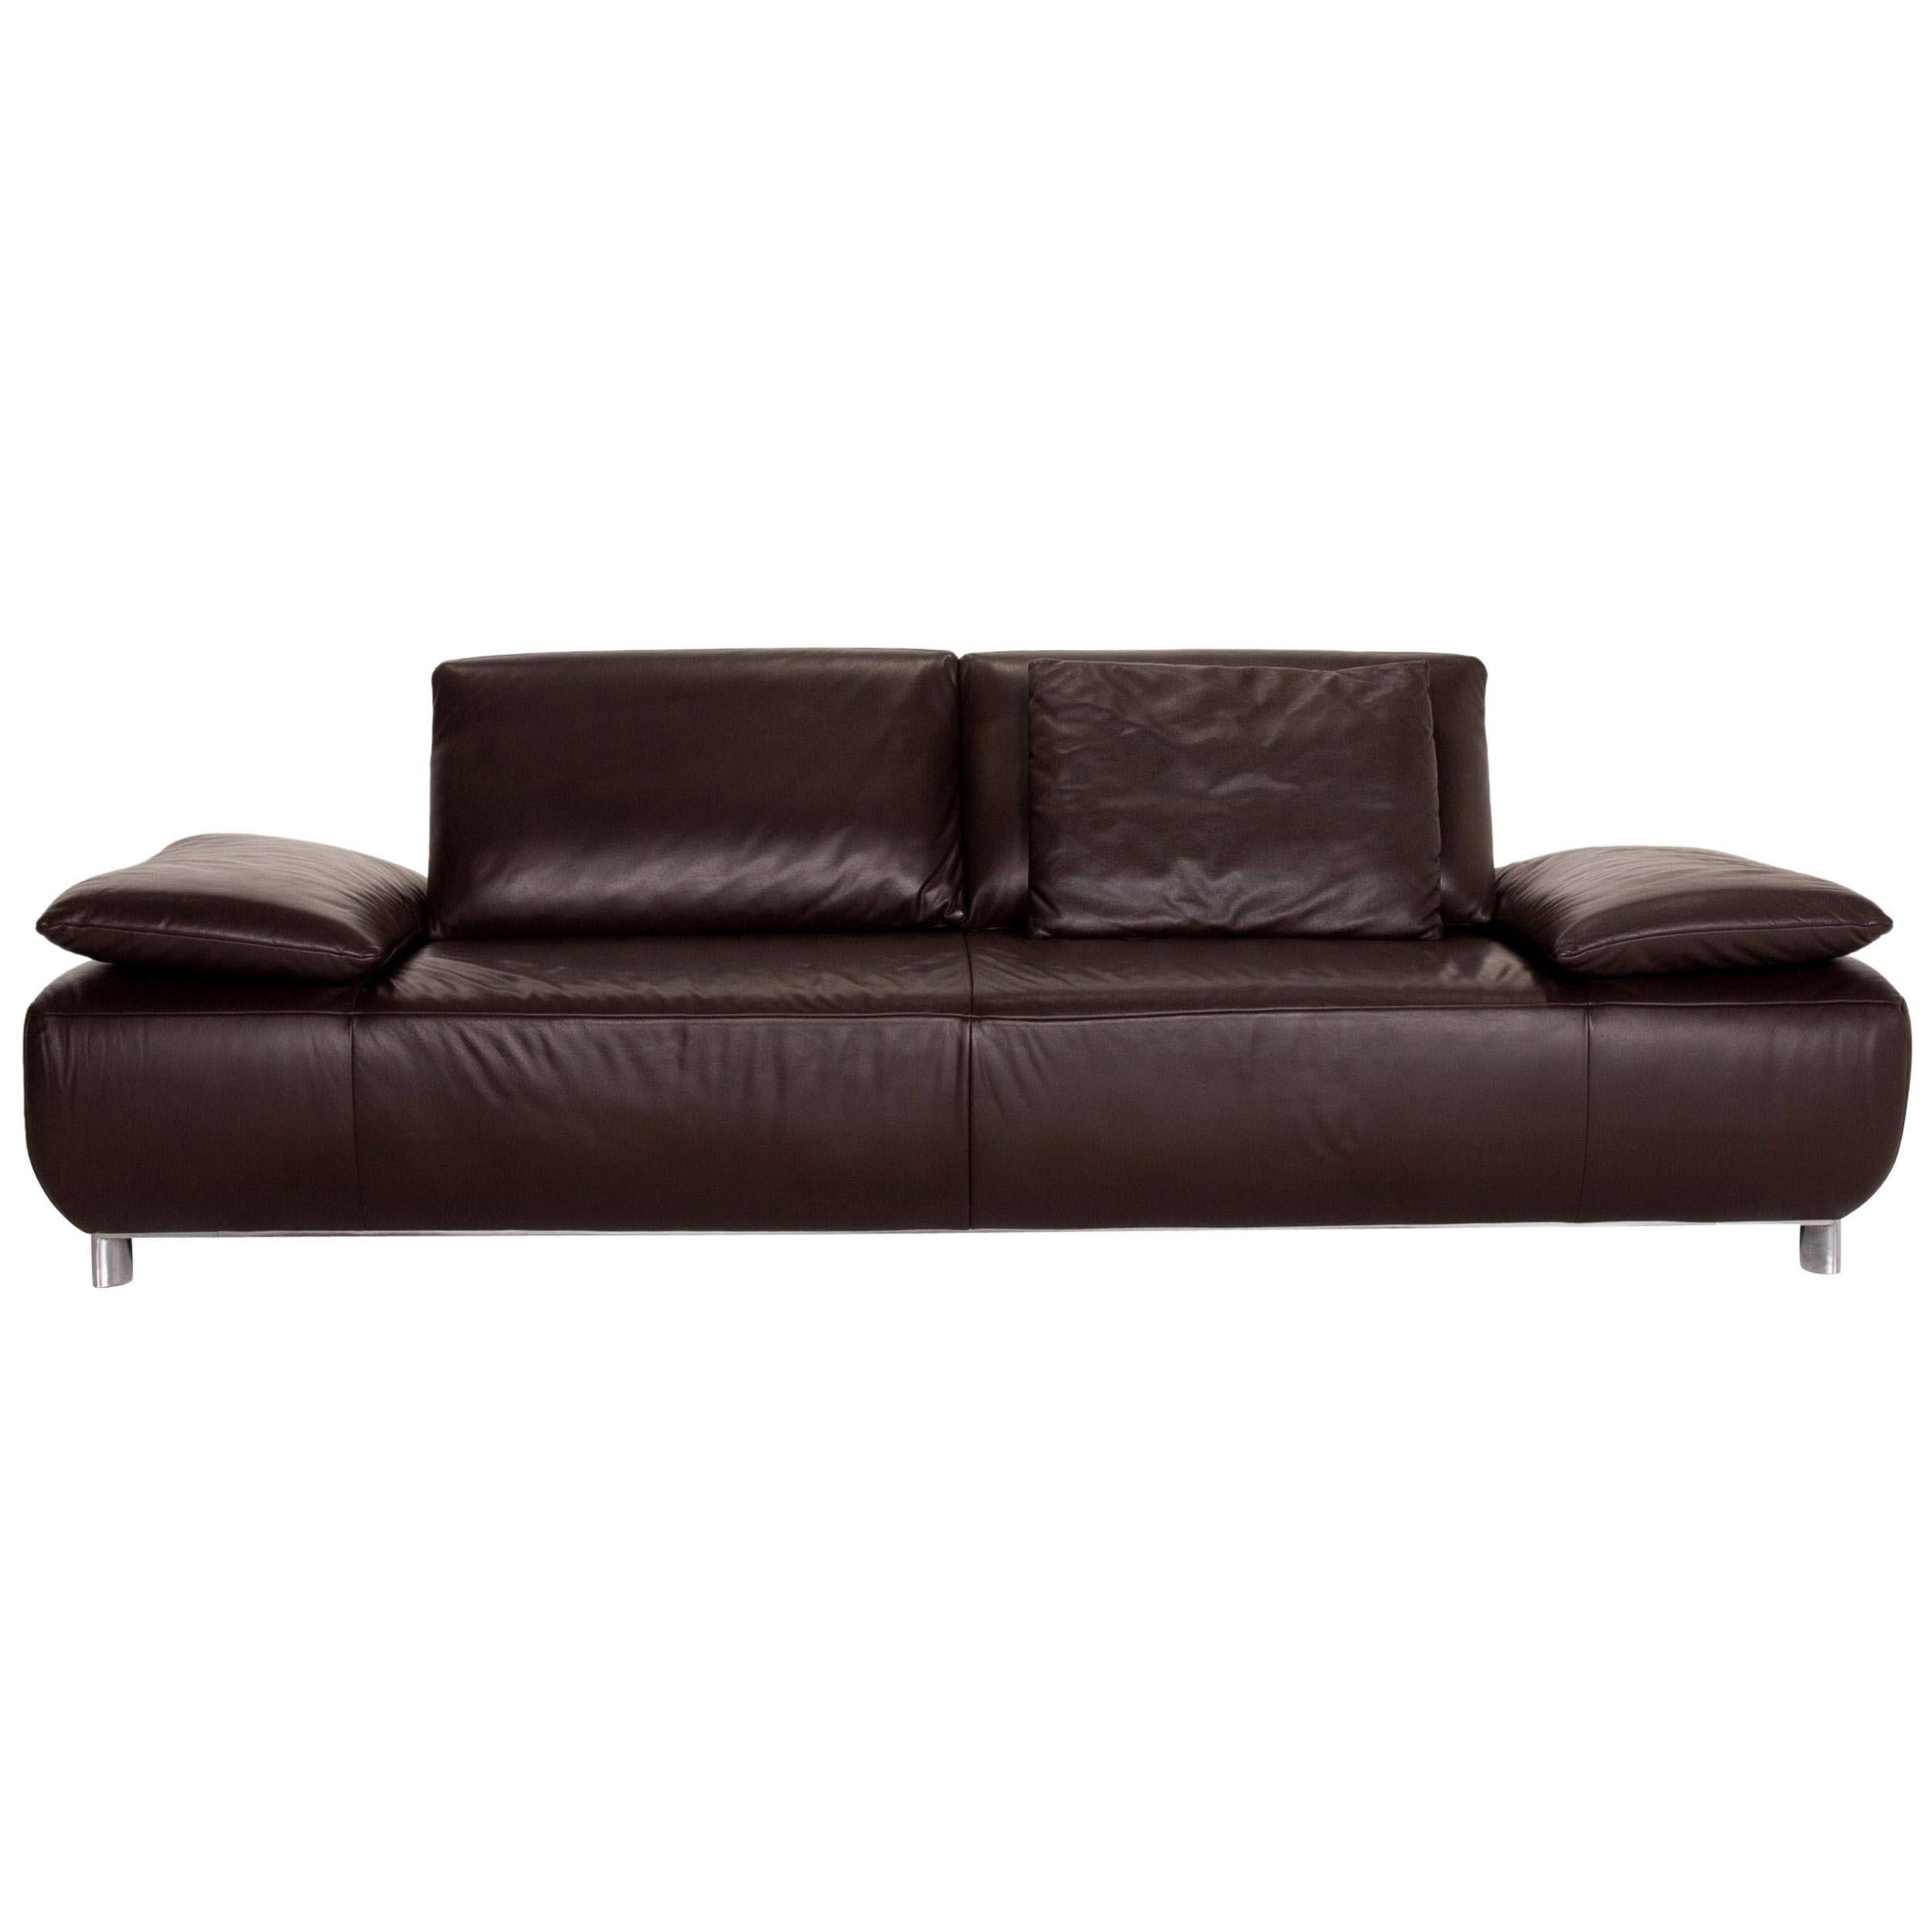 Koinor Volare Leather Sofa Brown Dark Brown Three-Seat Function Couch For Sale